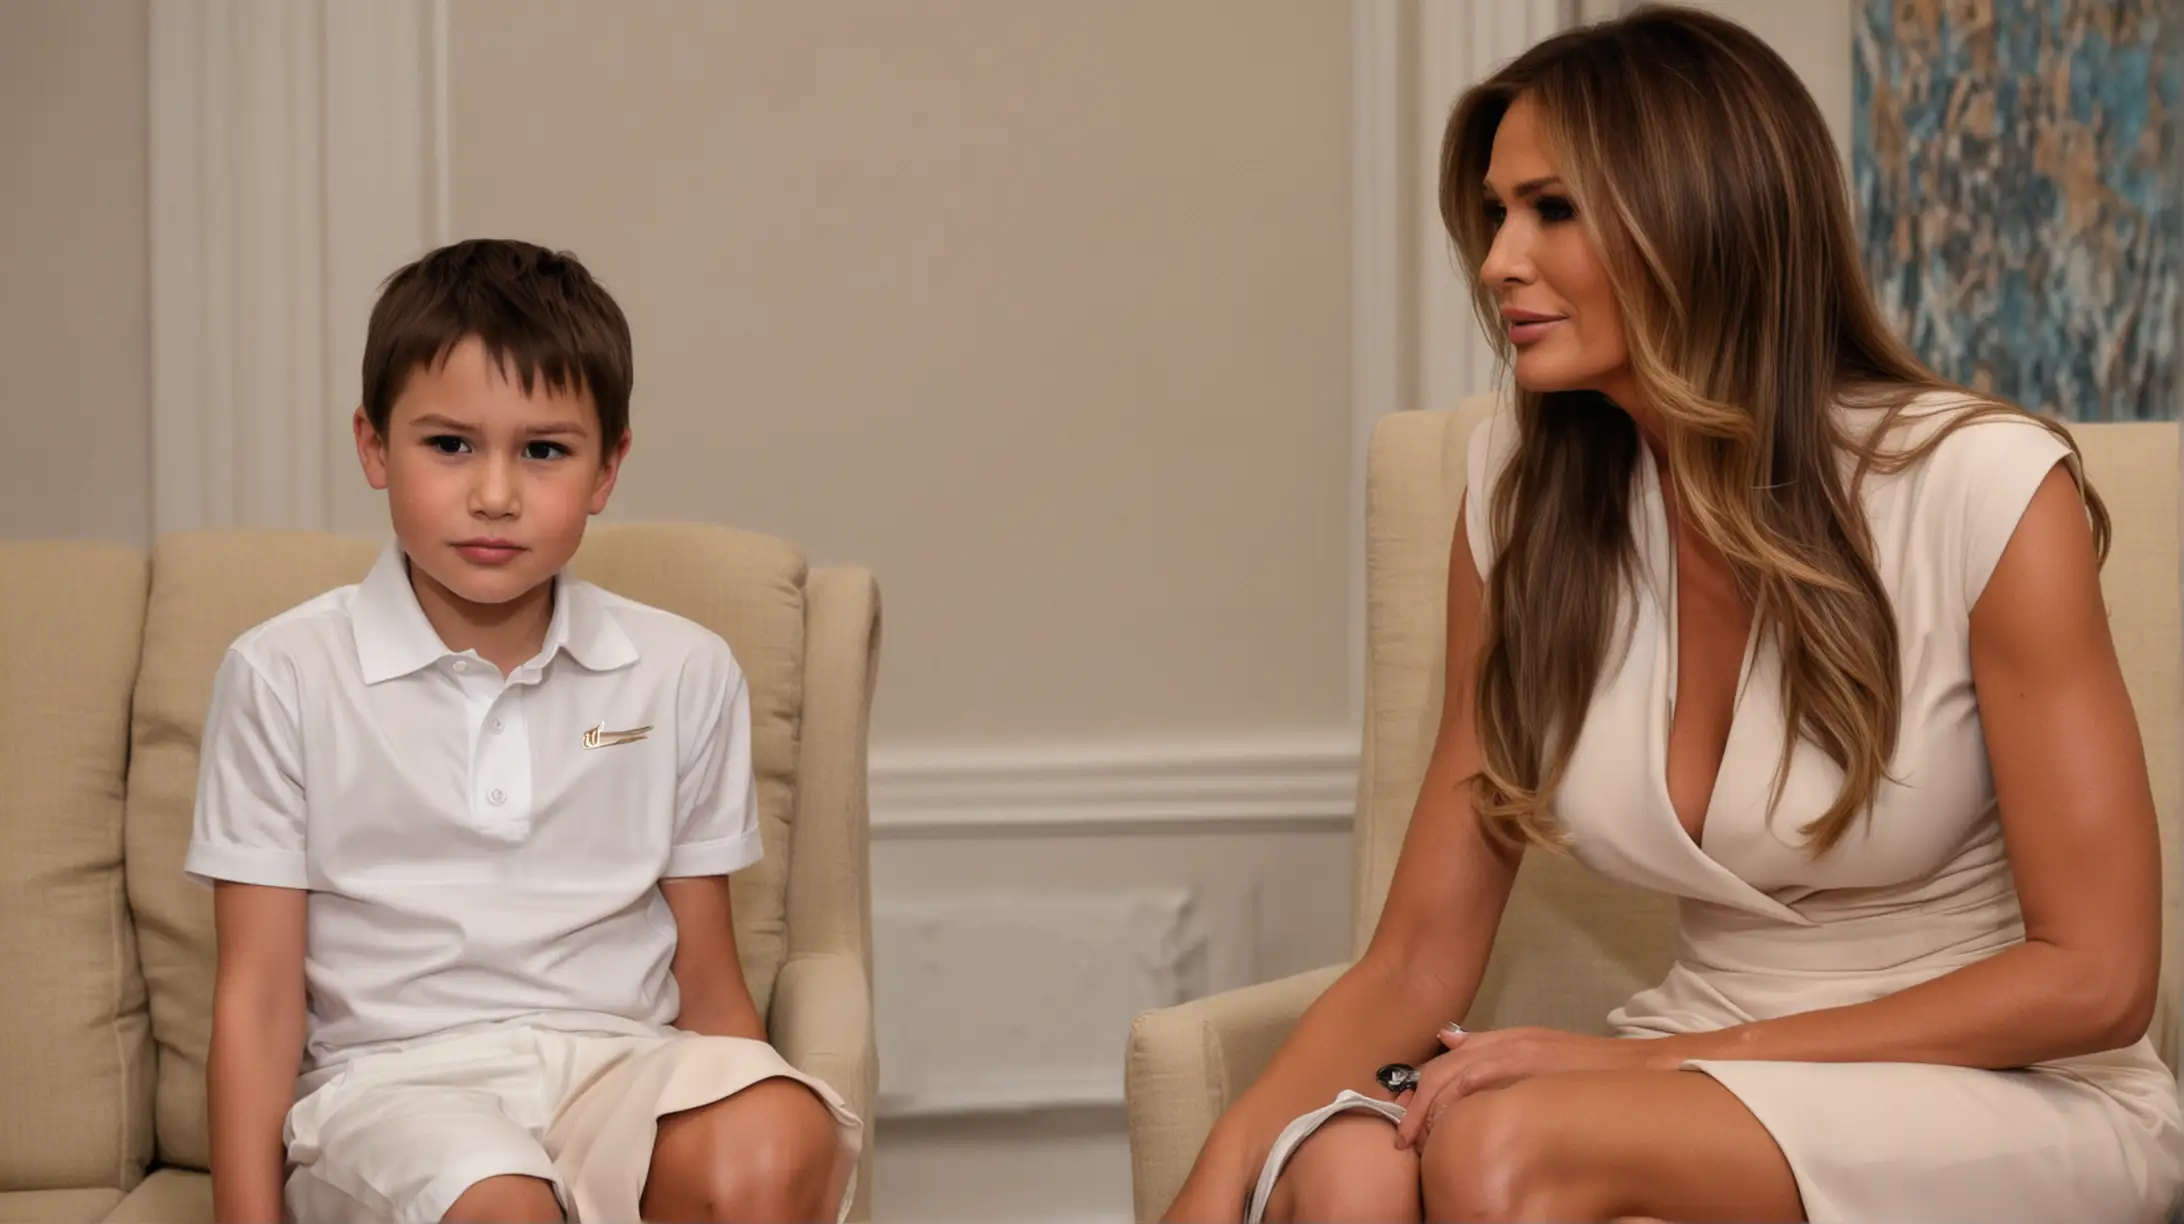 Melania Trump Sitting with a Boy Gentle Interaction and Elegant Composure